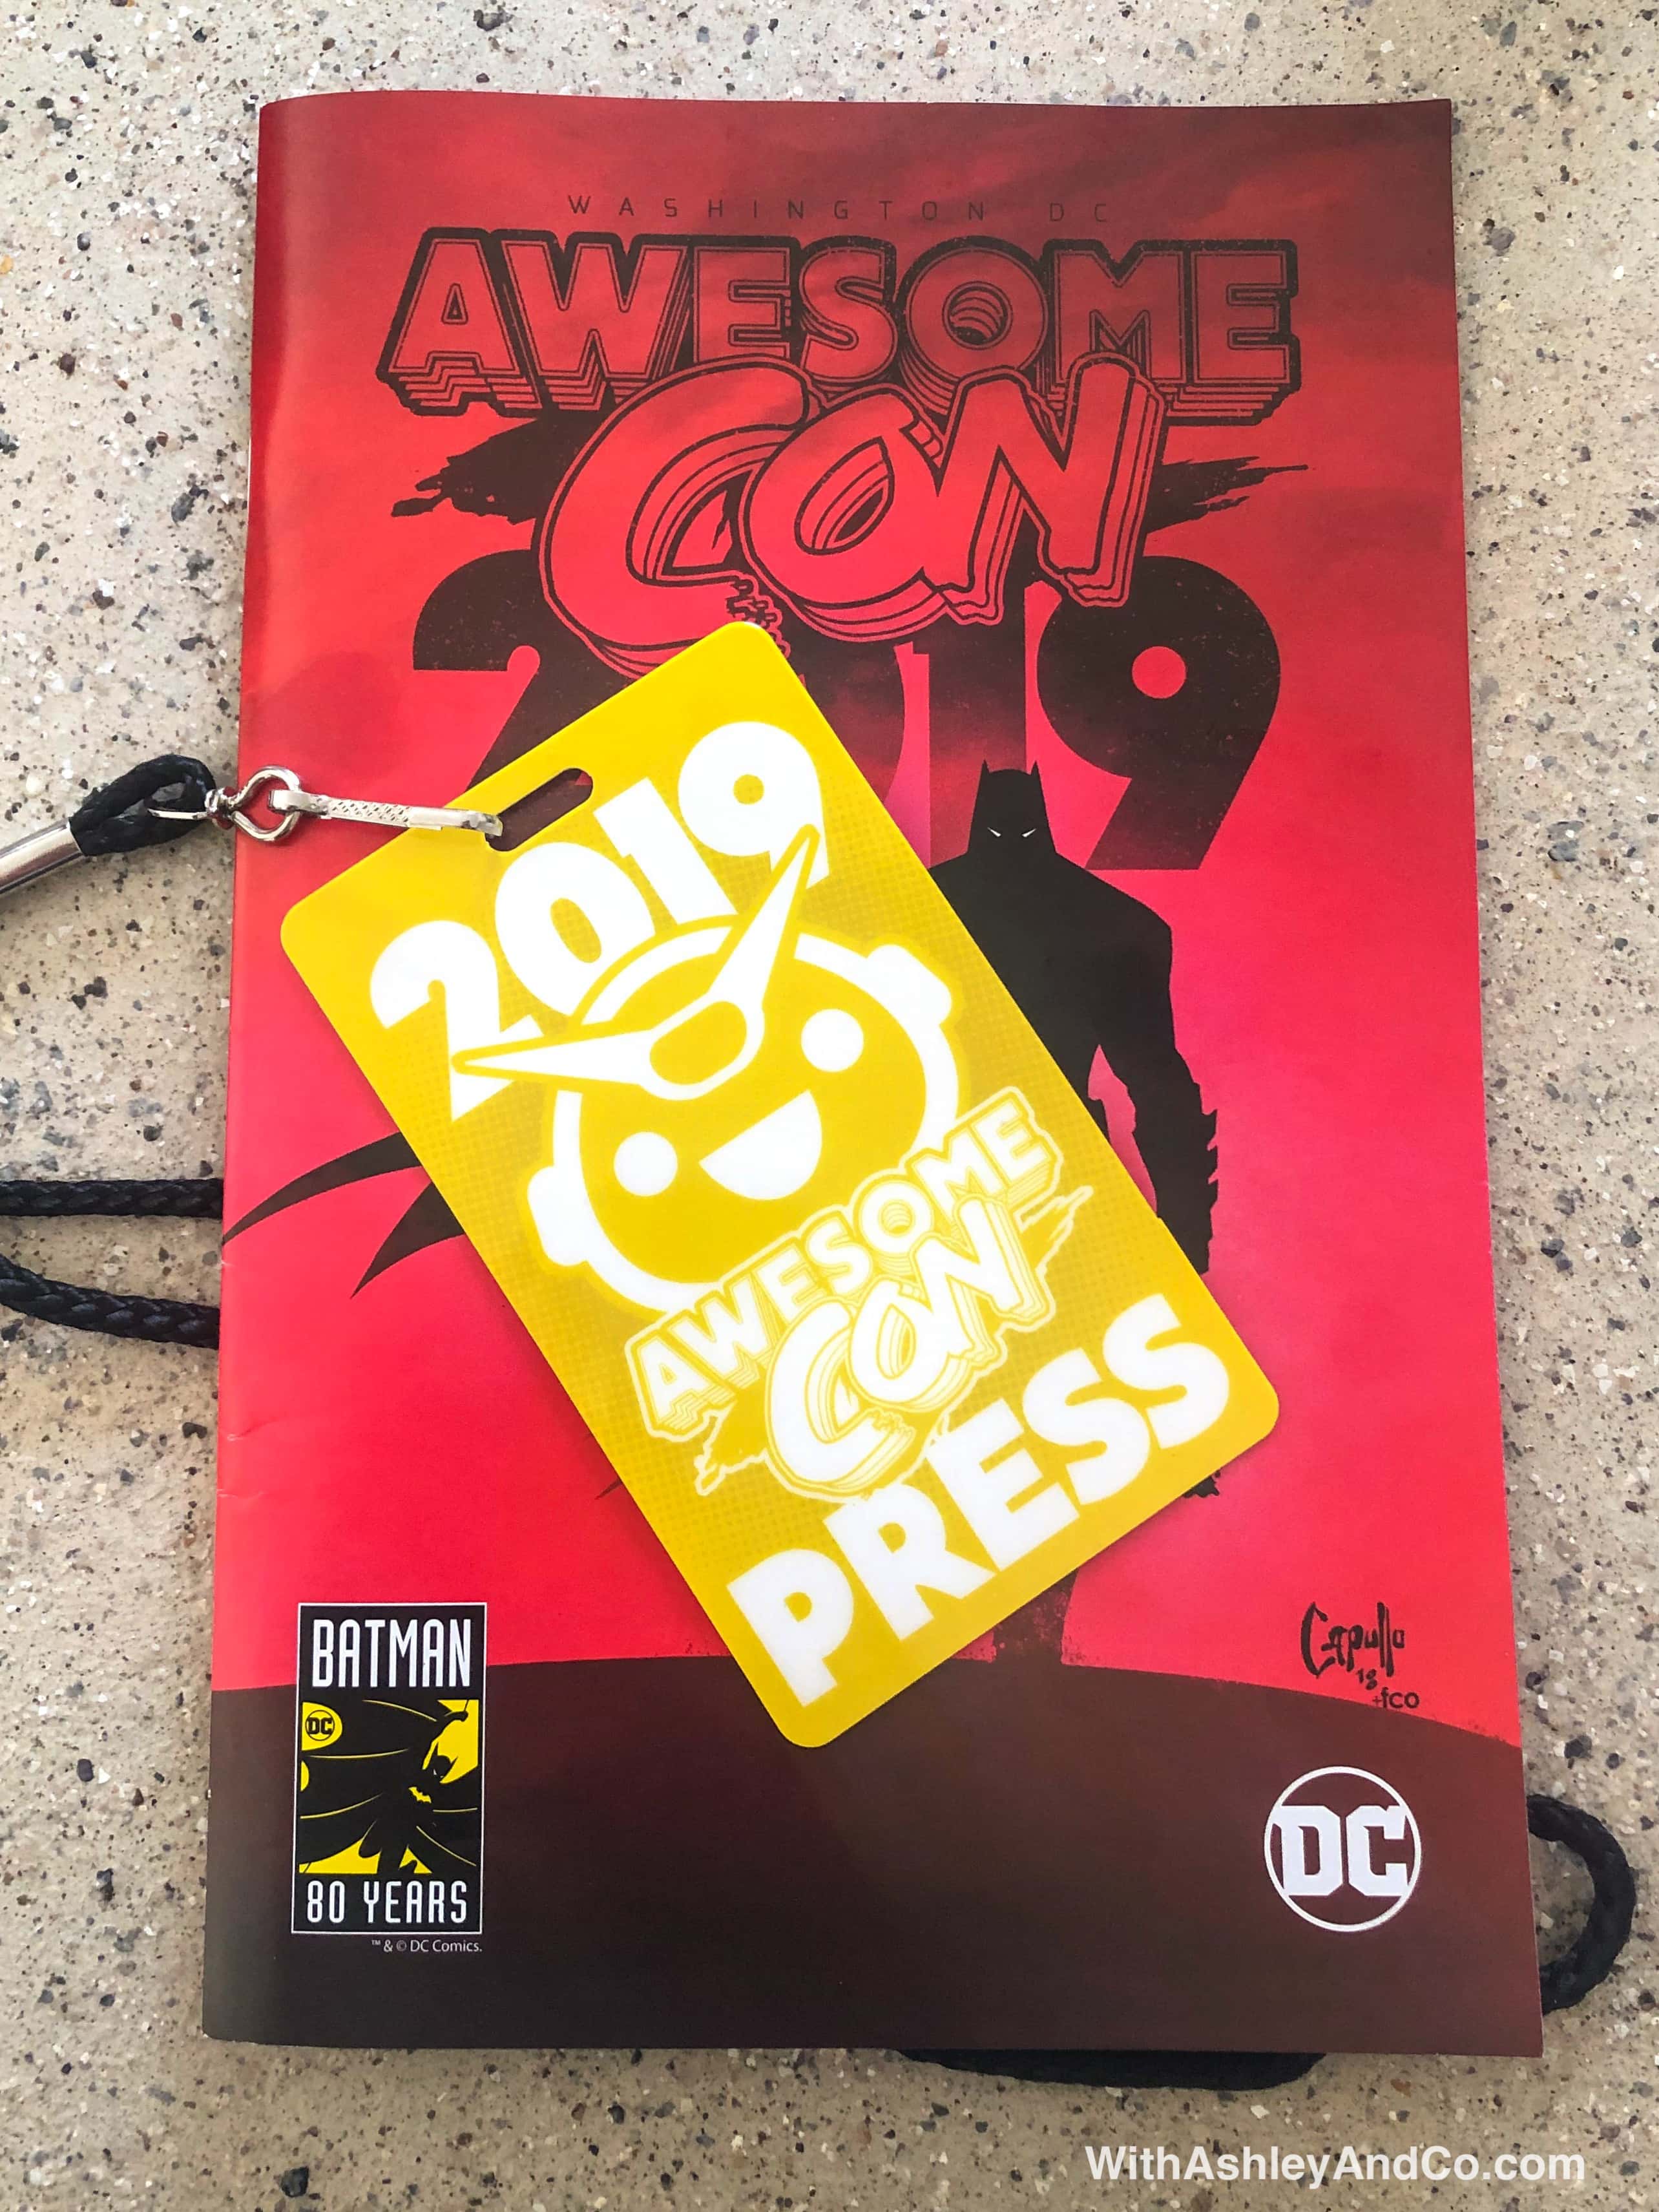 Awesome Con 2019 Highlights